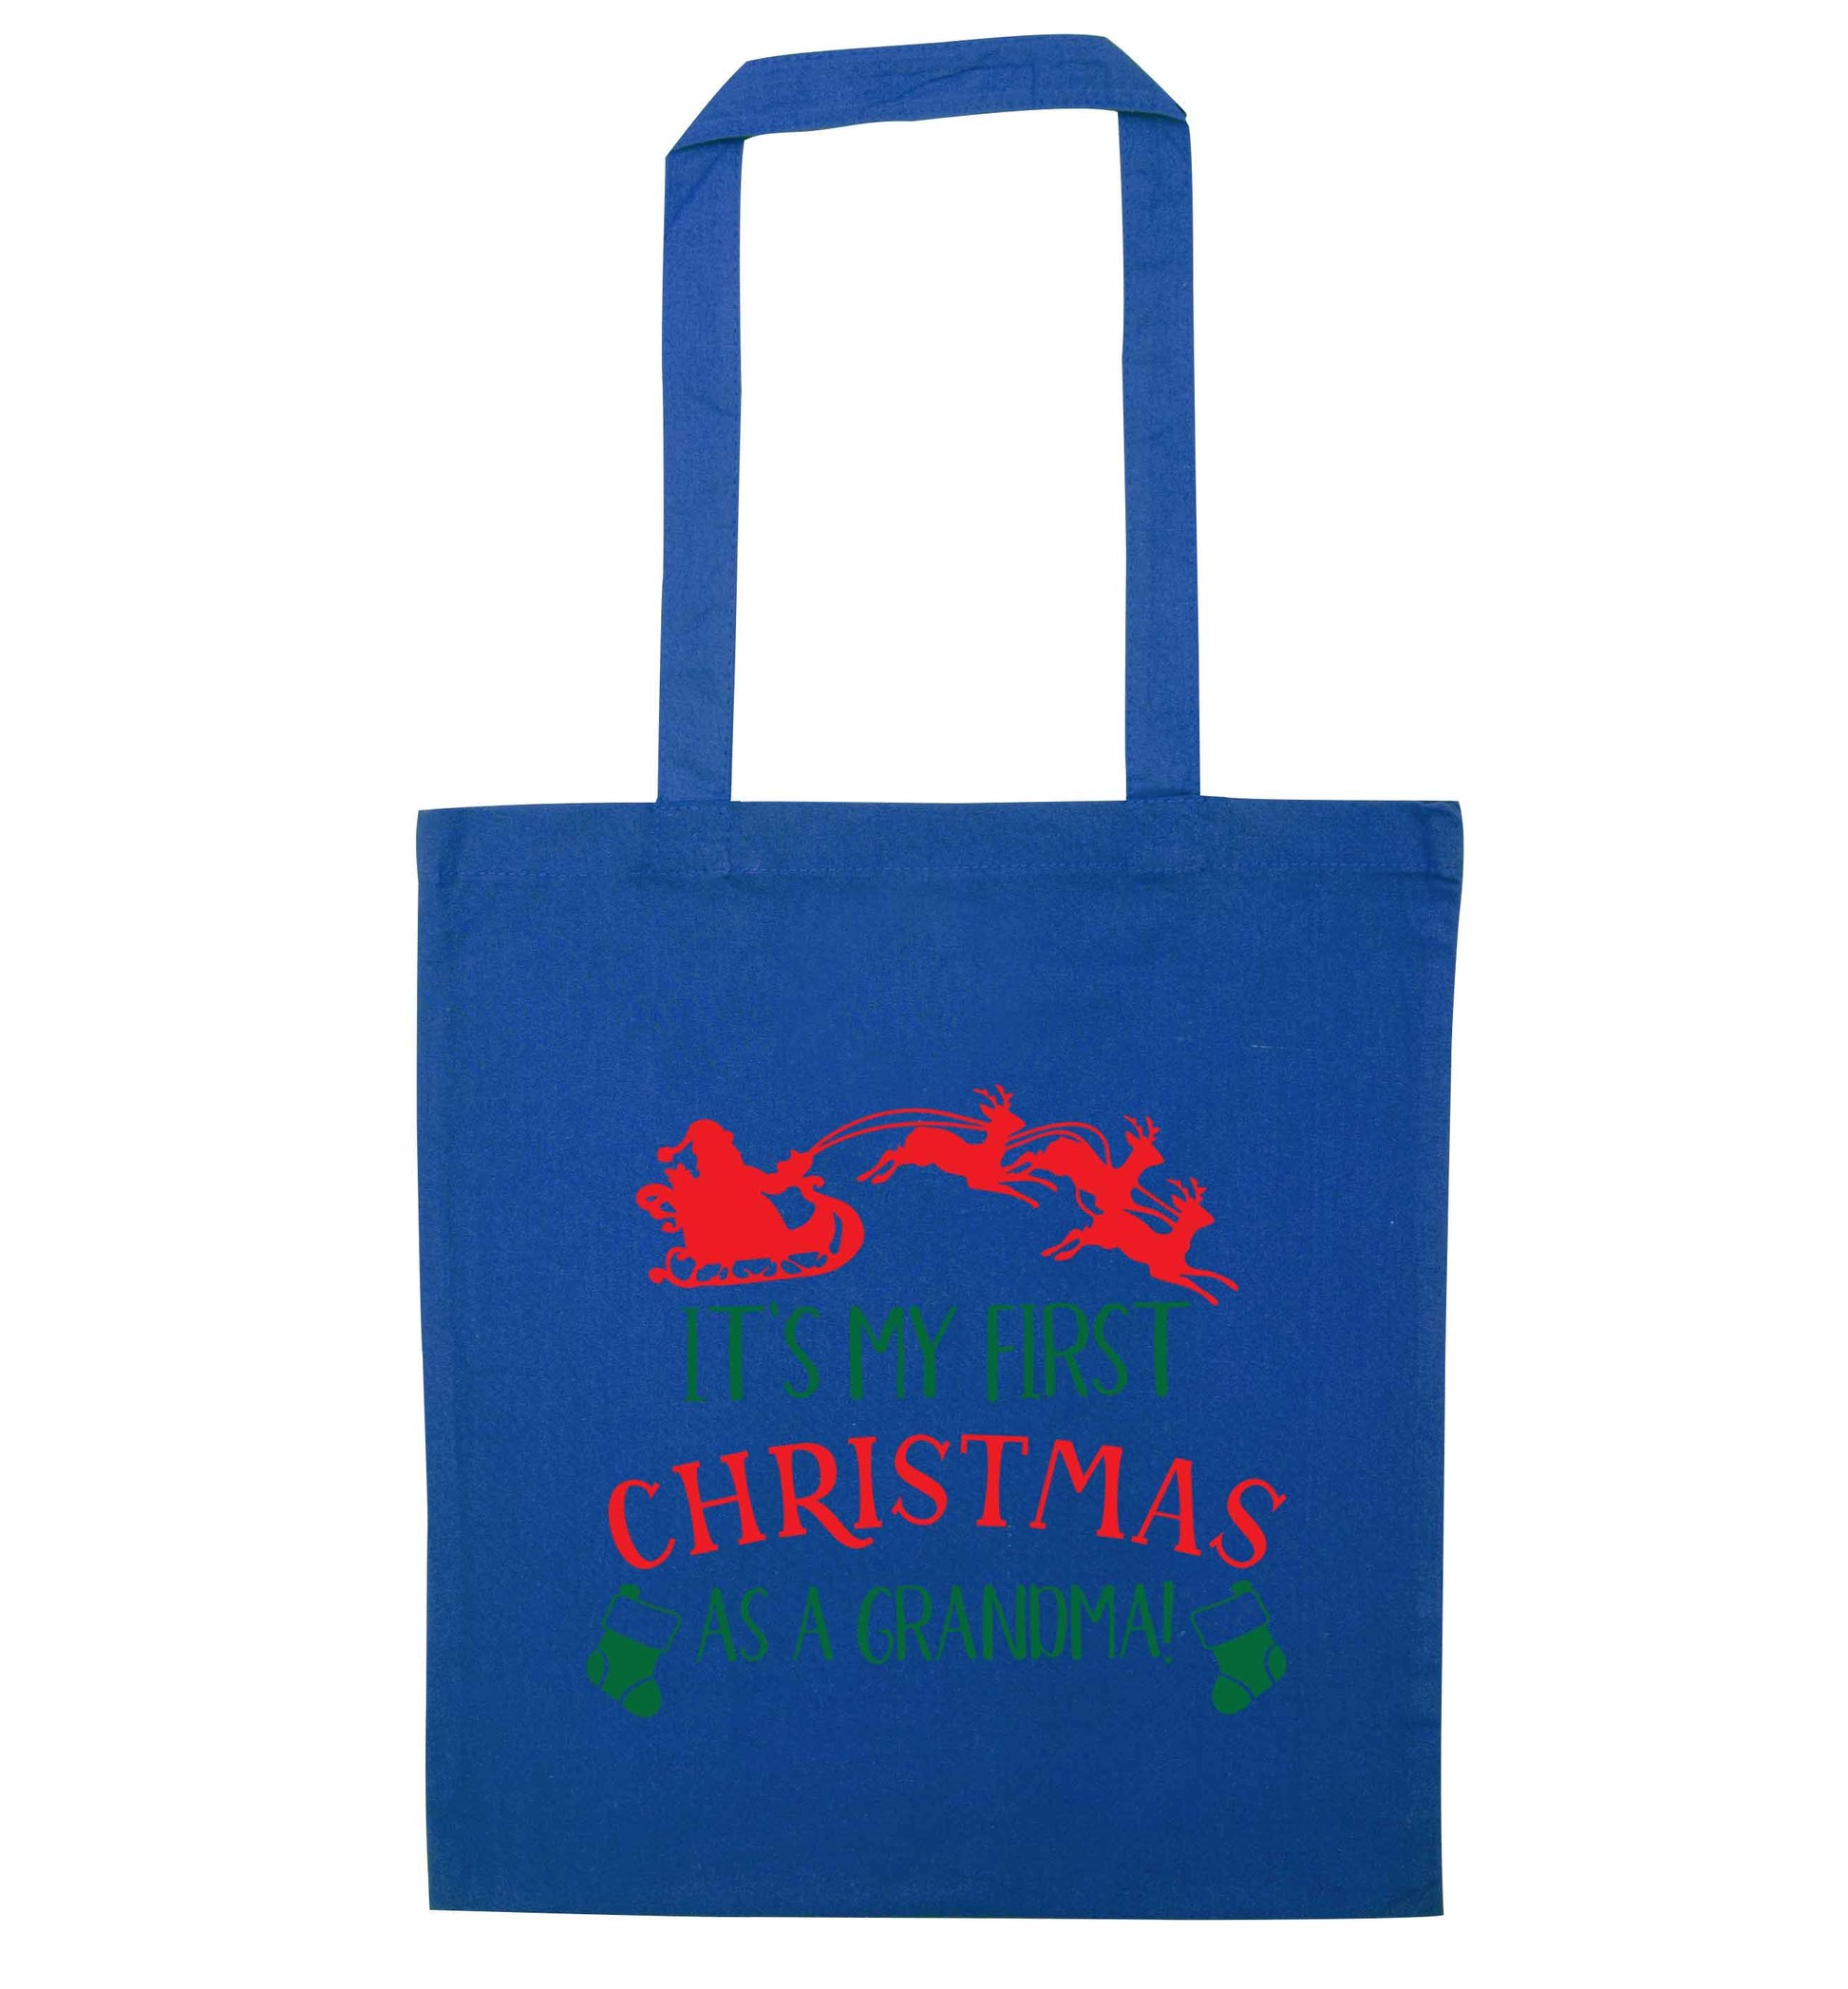 It's my first Christmas as a grandma! blue tote bag